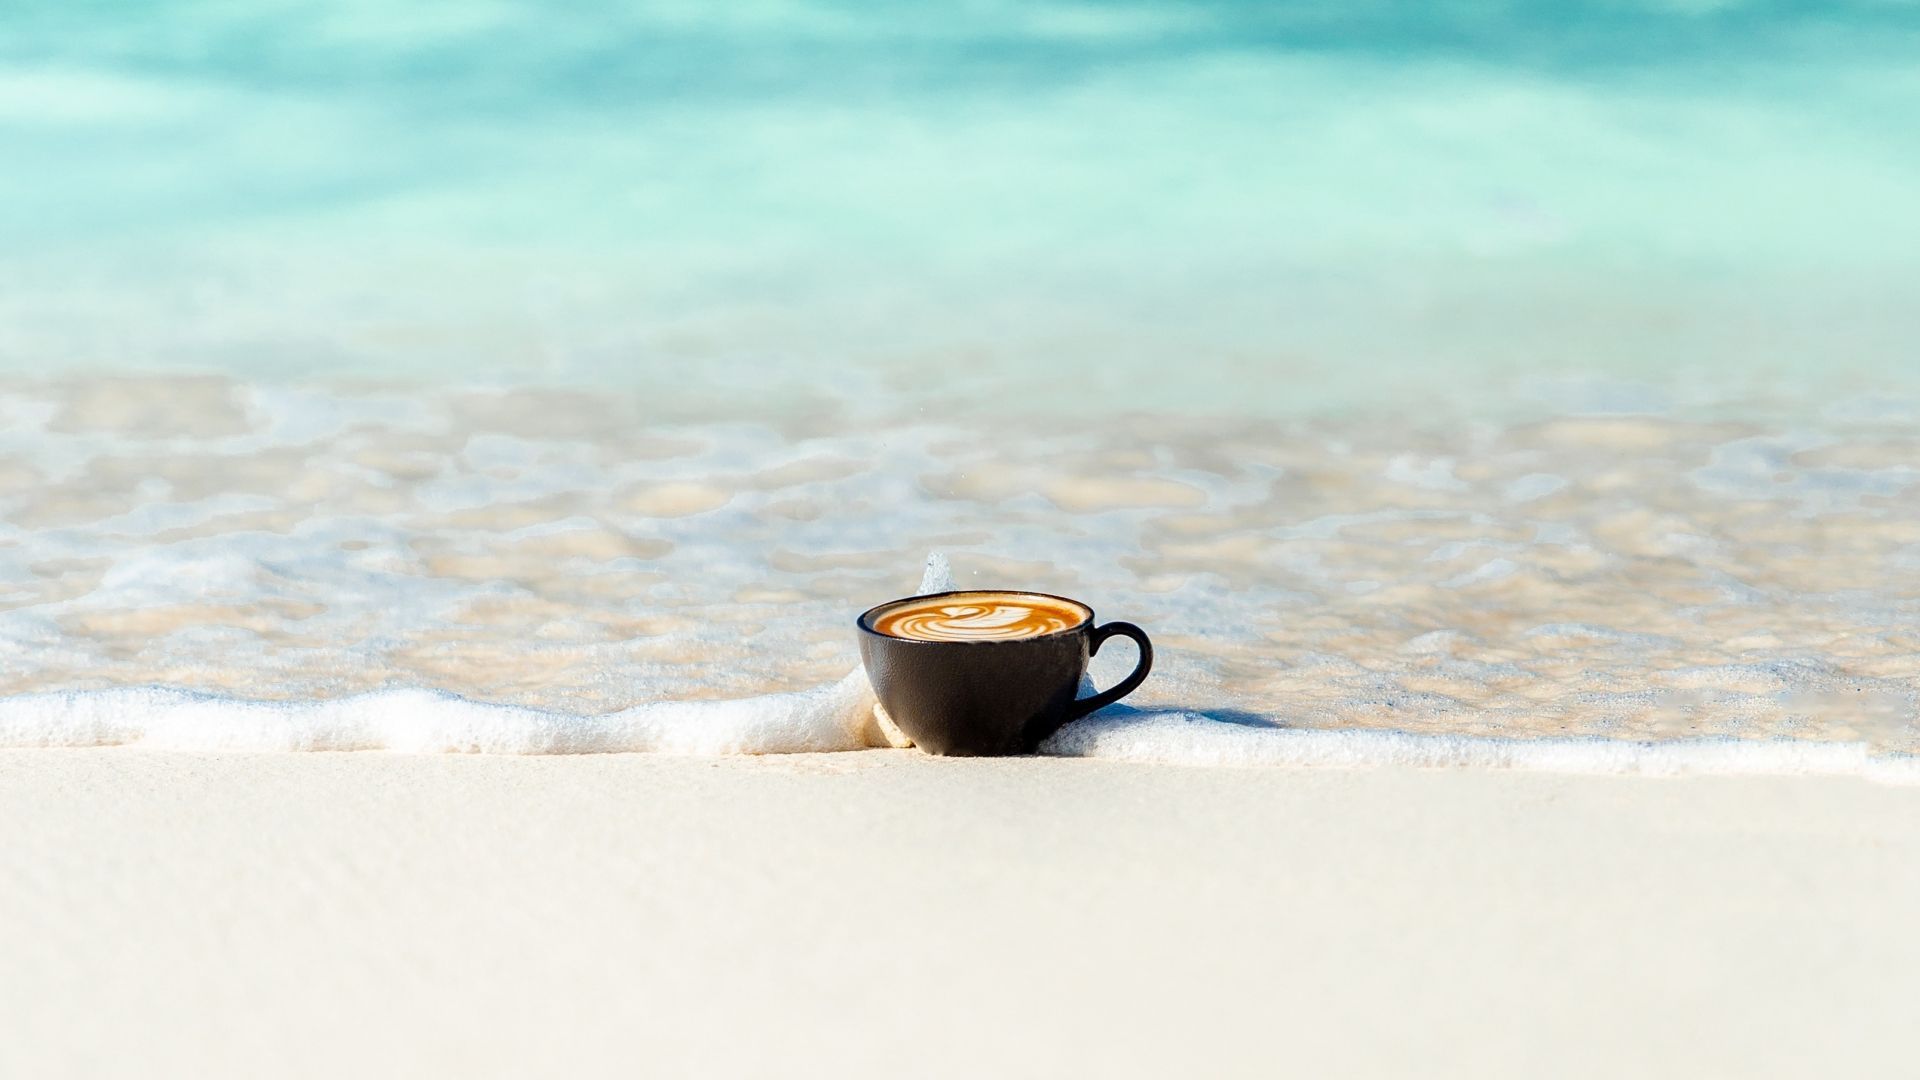 Desktop wallpaper coffee cup, beach, sea waves, soft, minimal, HD image, picture, background, 299a42